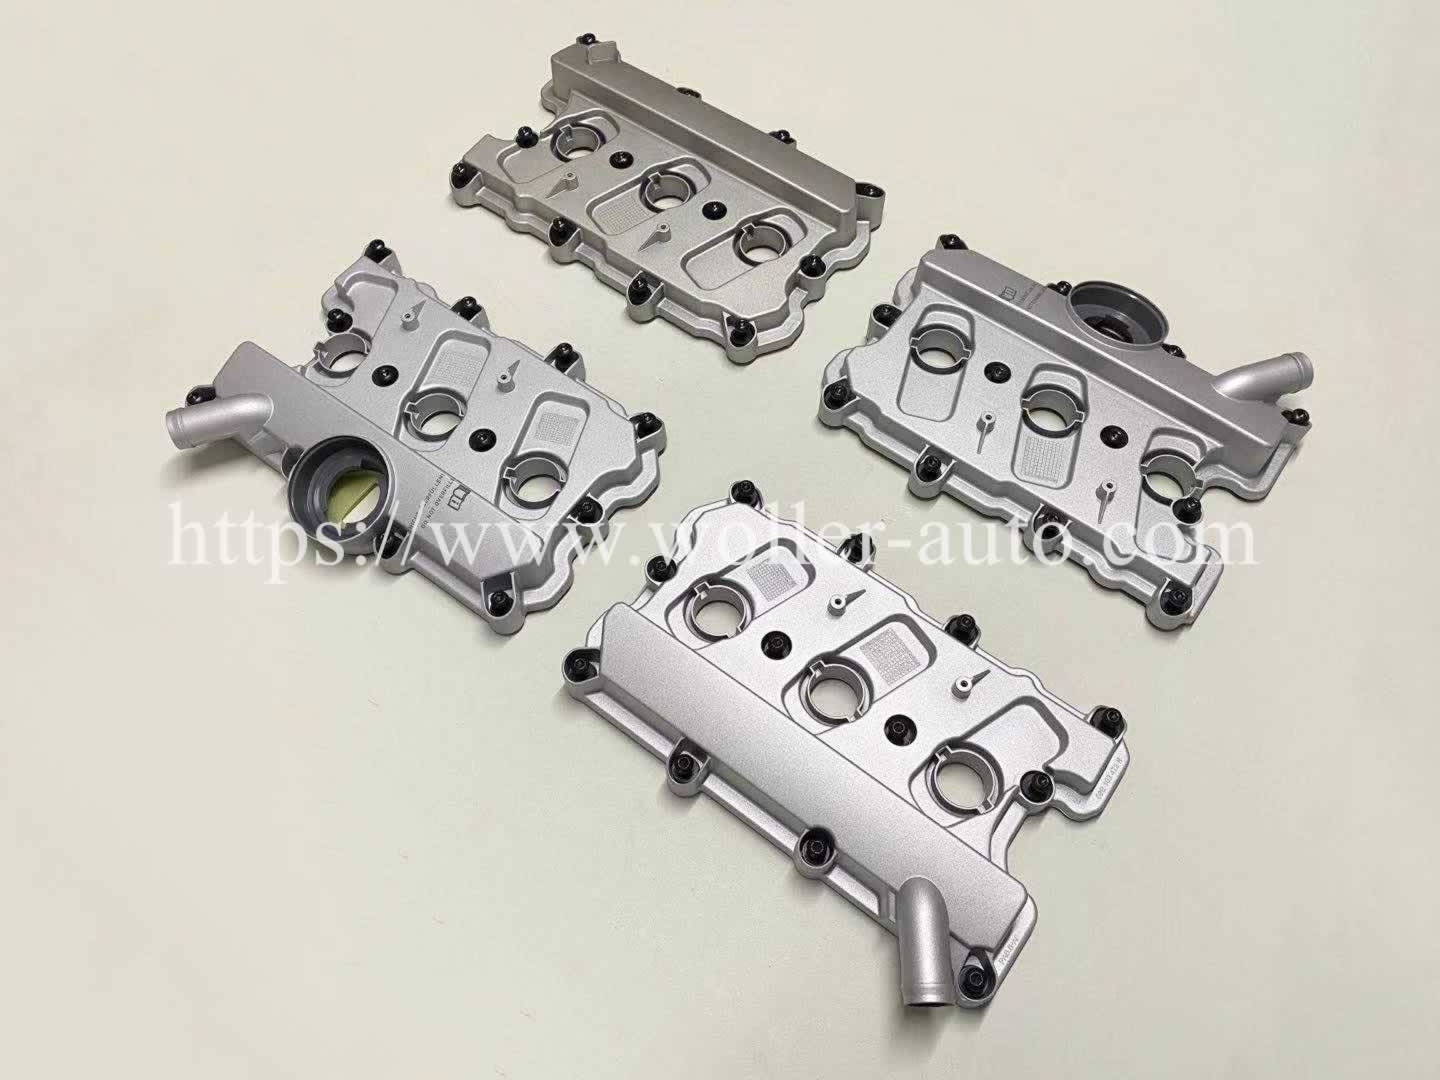 Right Side Engine Valve Cover OE 06E103472N With Gasket For Audi A4 A5 A6 A7 S4 Q5 3.0L